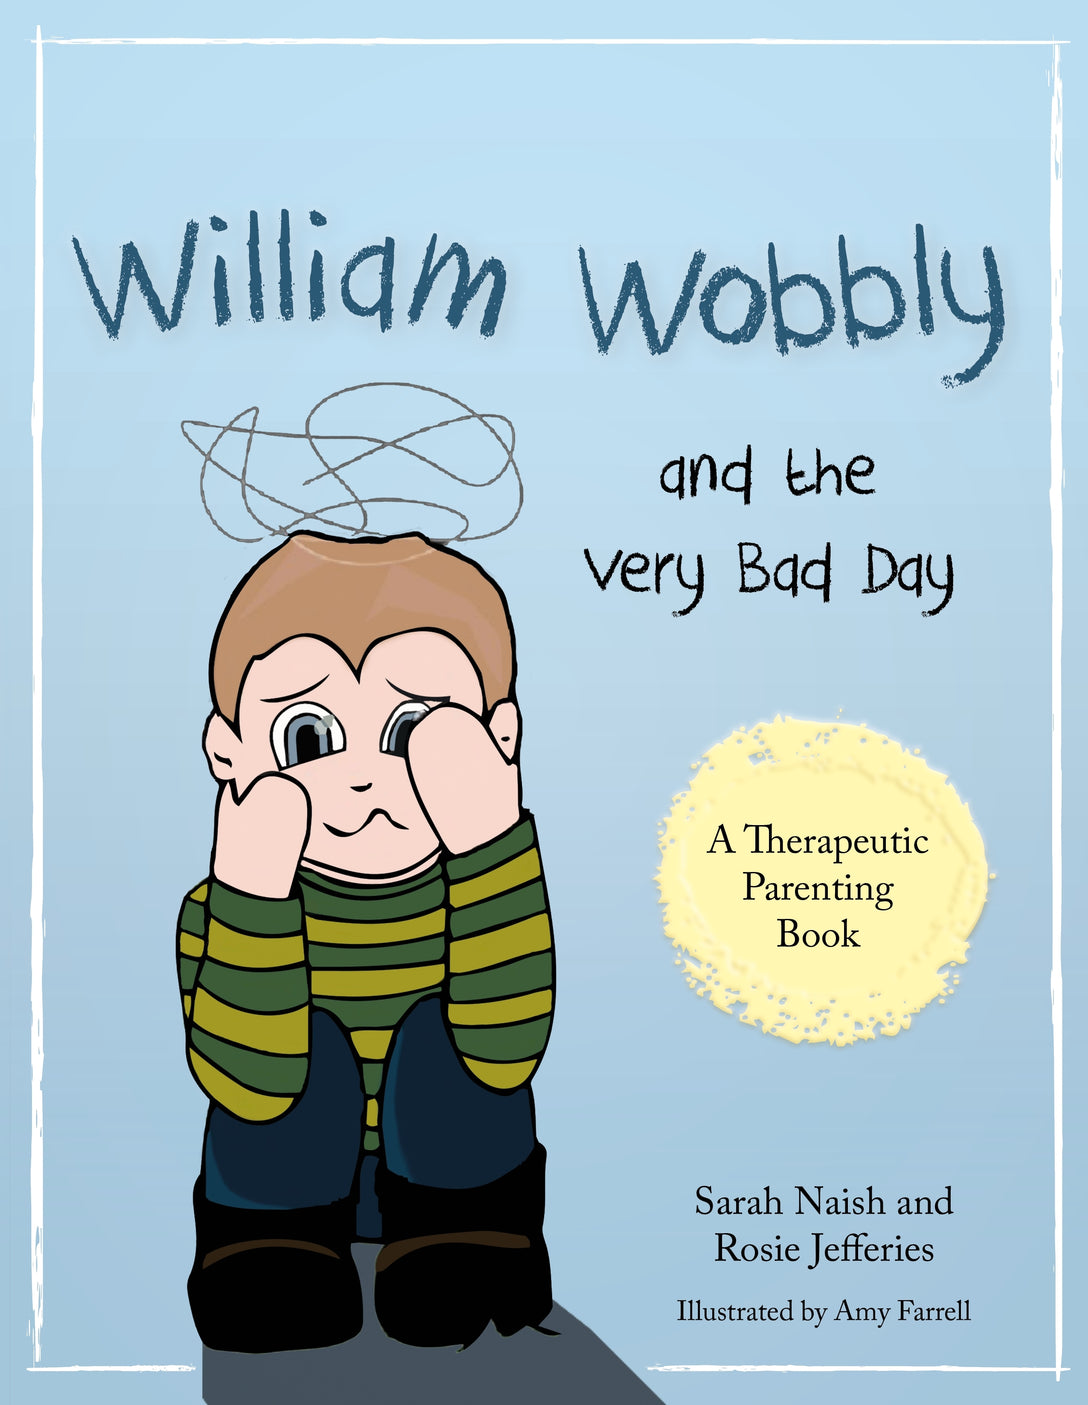 William Wobbly and the Very Bad Day by Amy Farrell, Rosie Jefferies, Sarah Naish